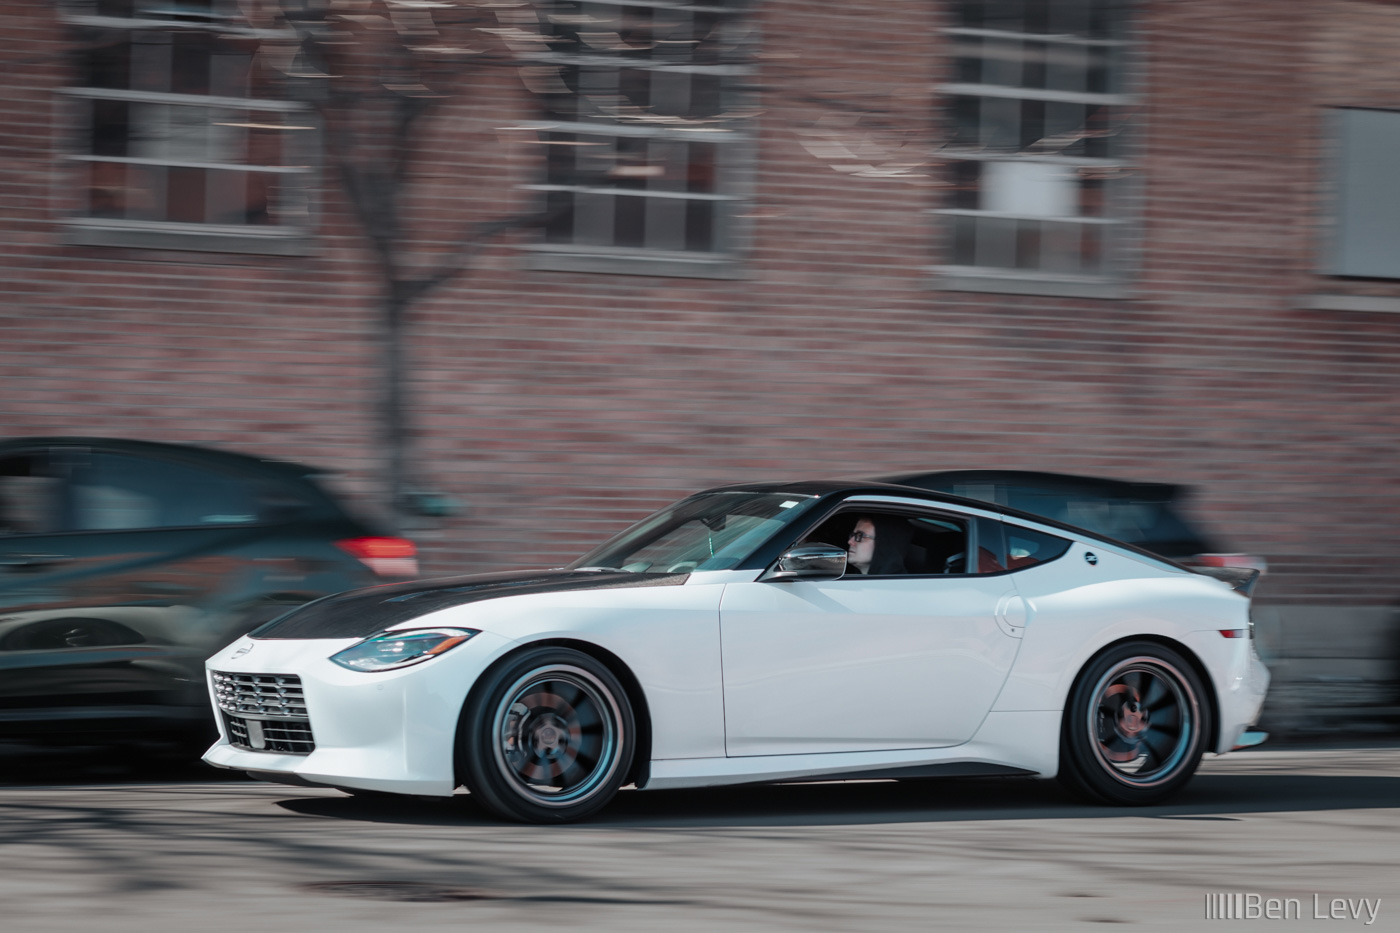 White Nissan Z Passing on a Chicago Street